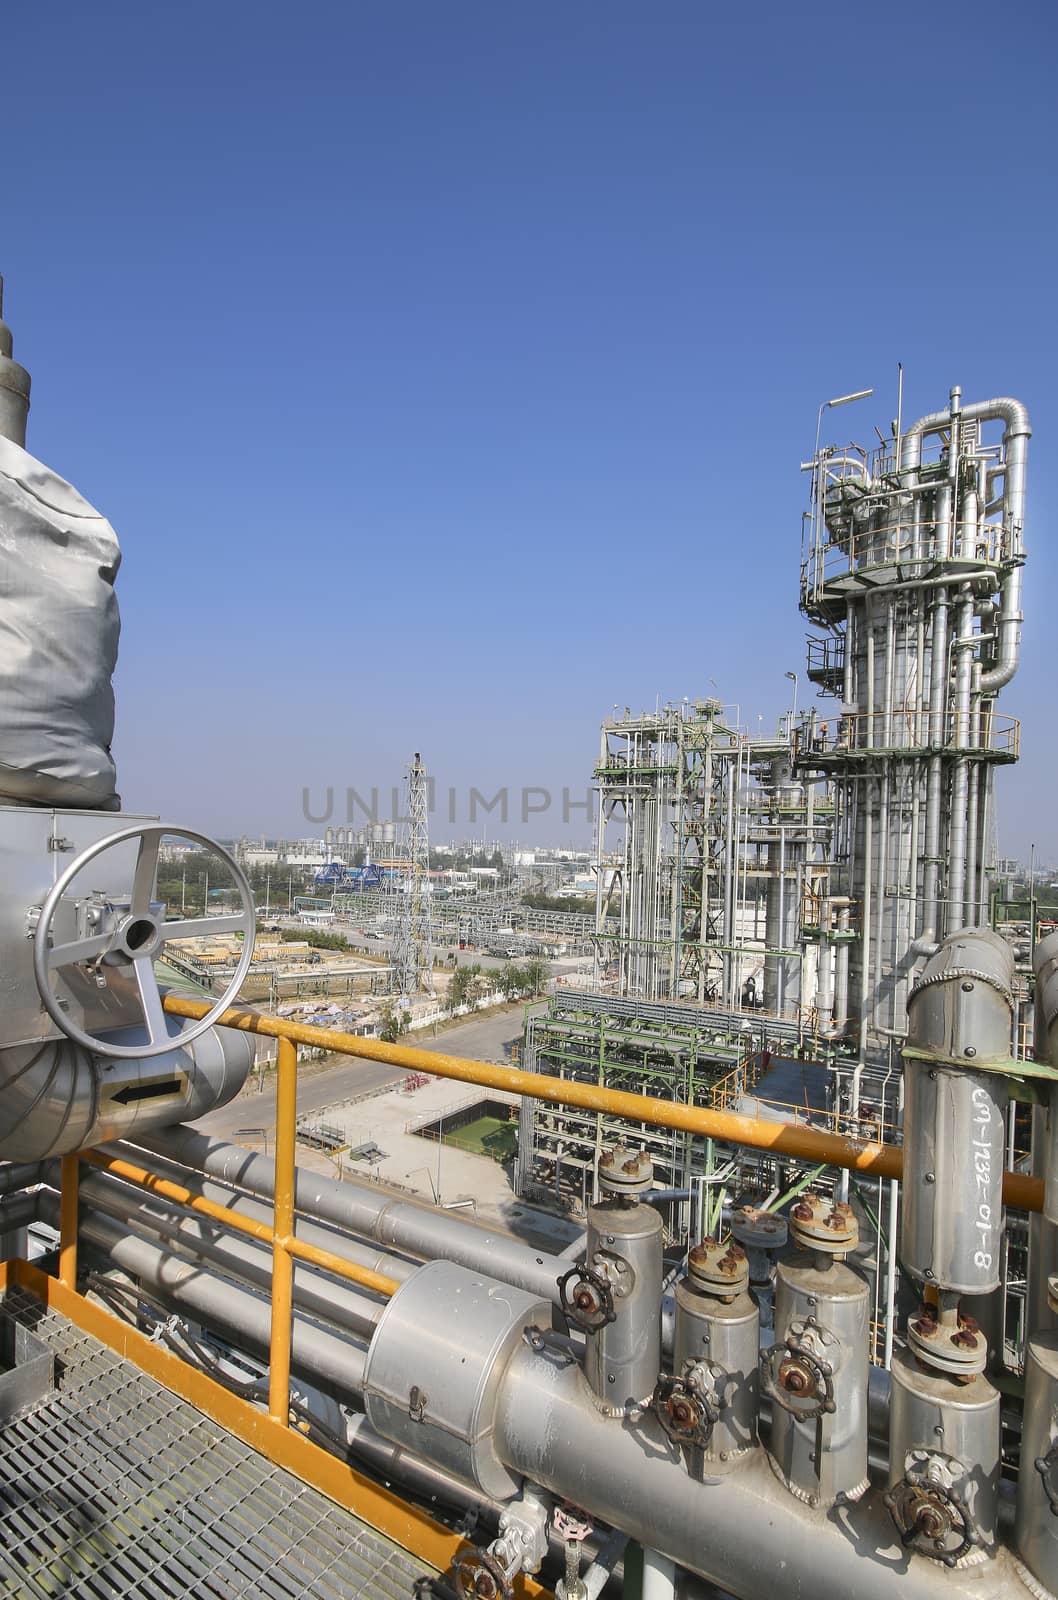 Oil and chemical industrial plant with blue sky in winter season